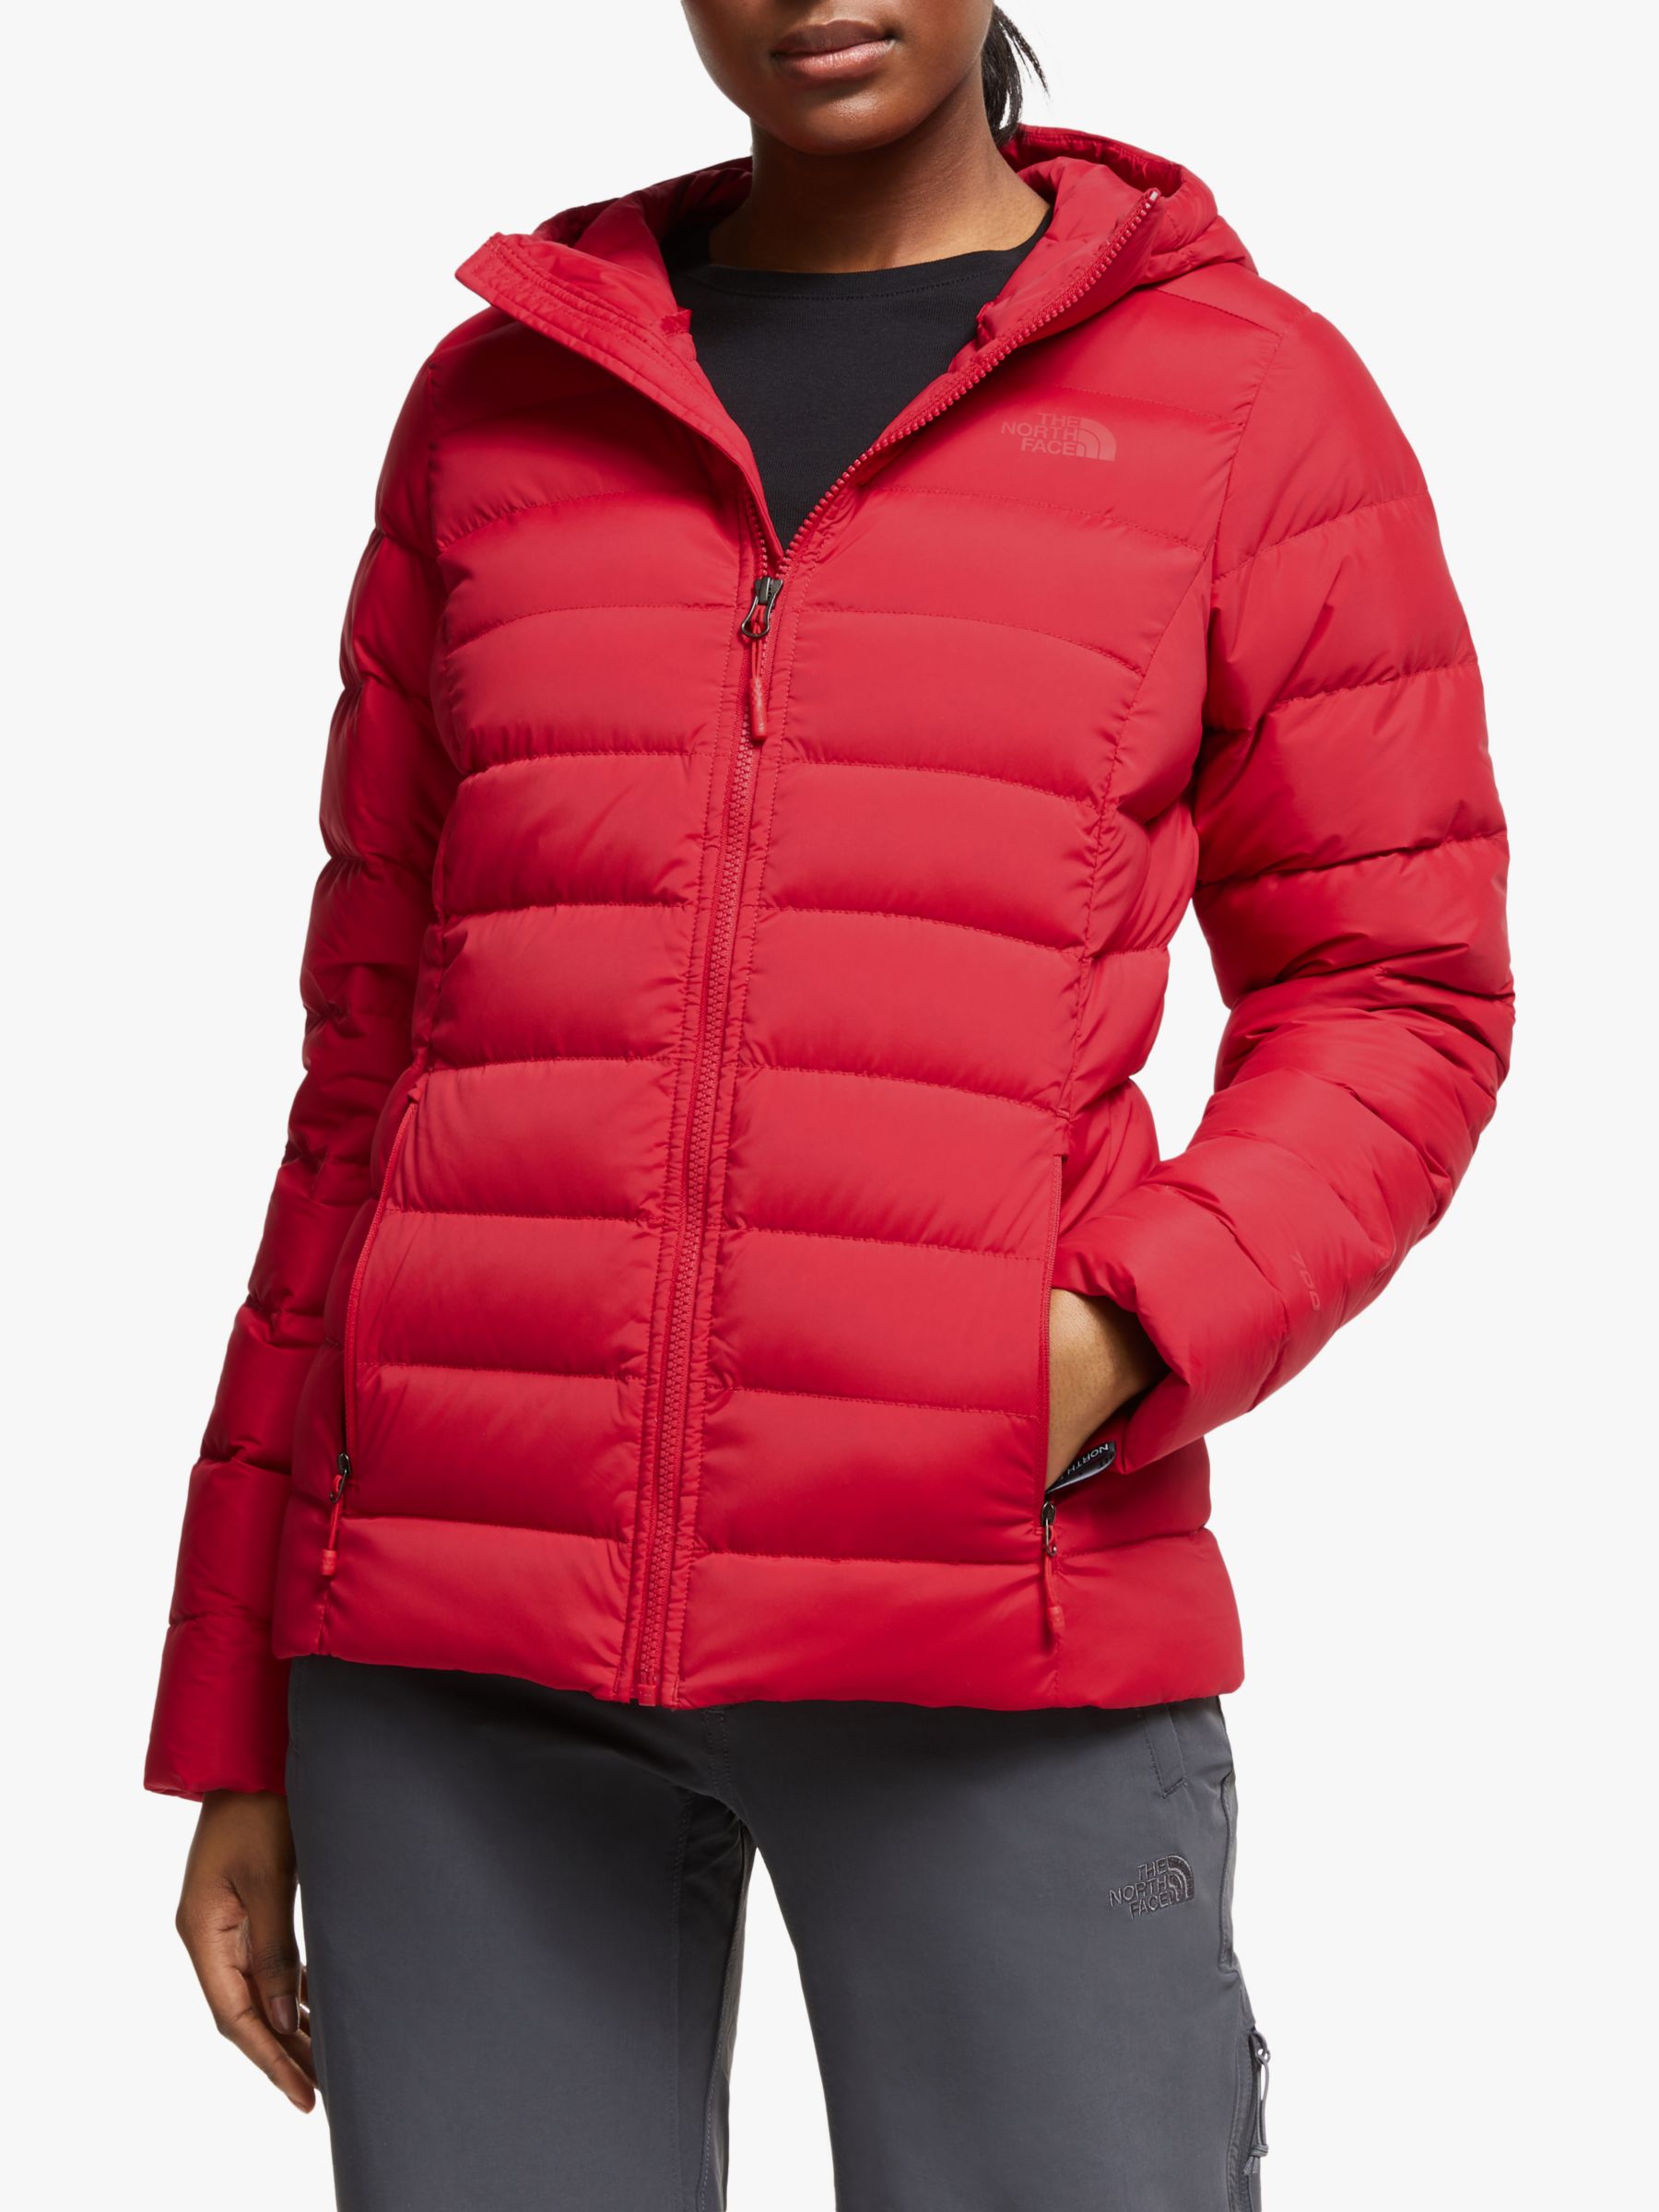 The North Face Stretch Down Women's Jacket